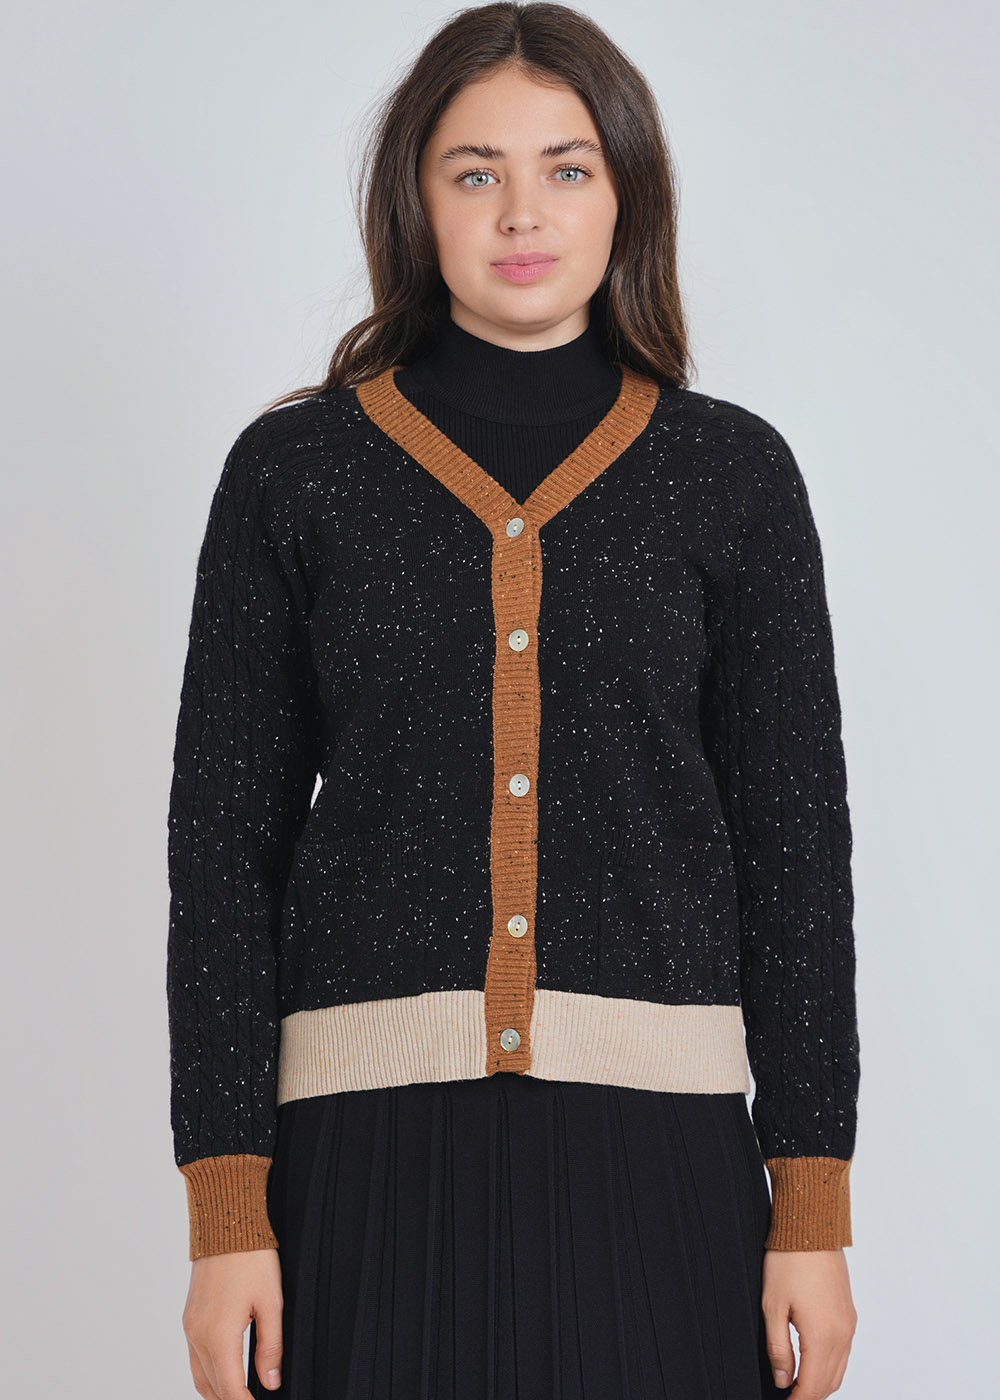 Soft Black Cardigan: Timeless Specks and Cozy Camel Finishes